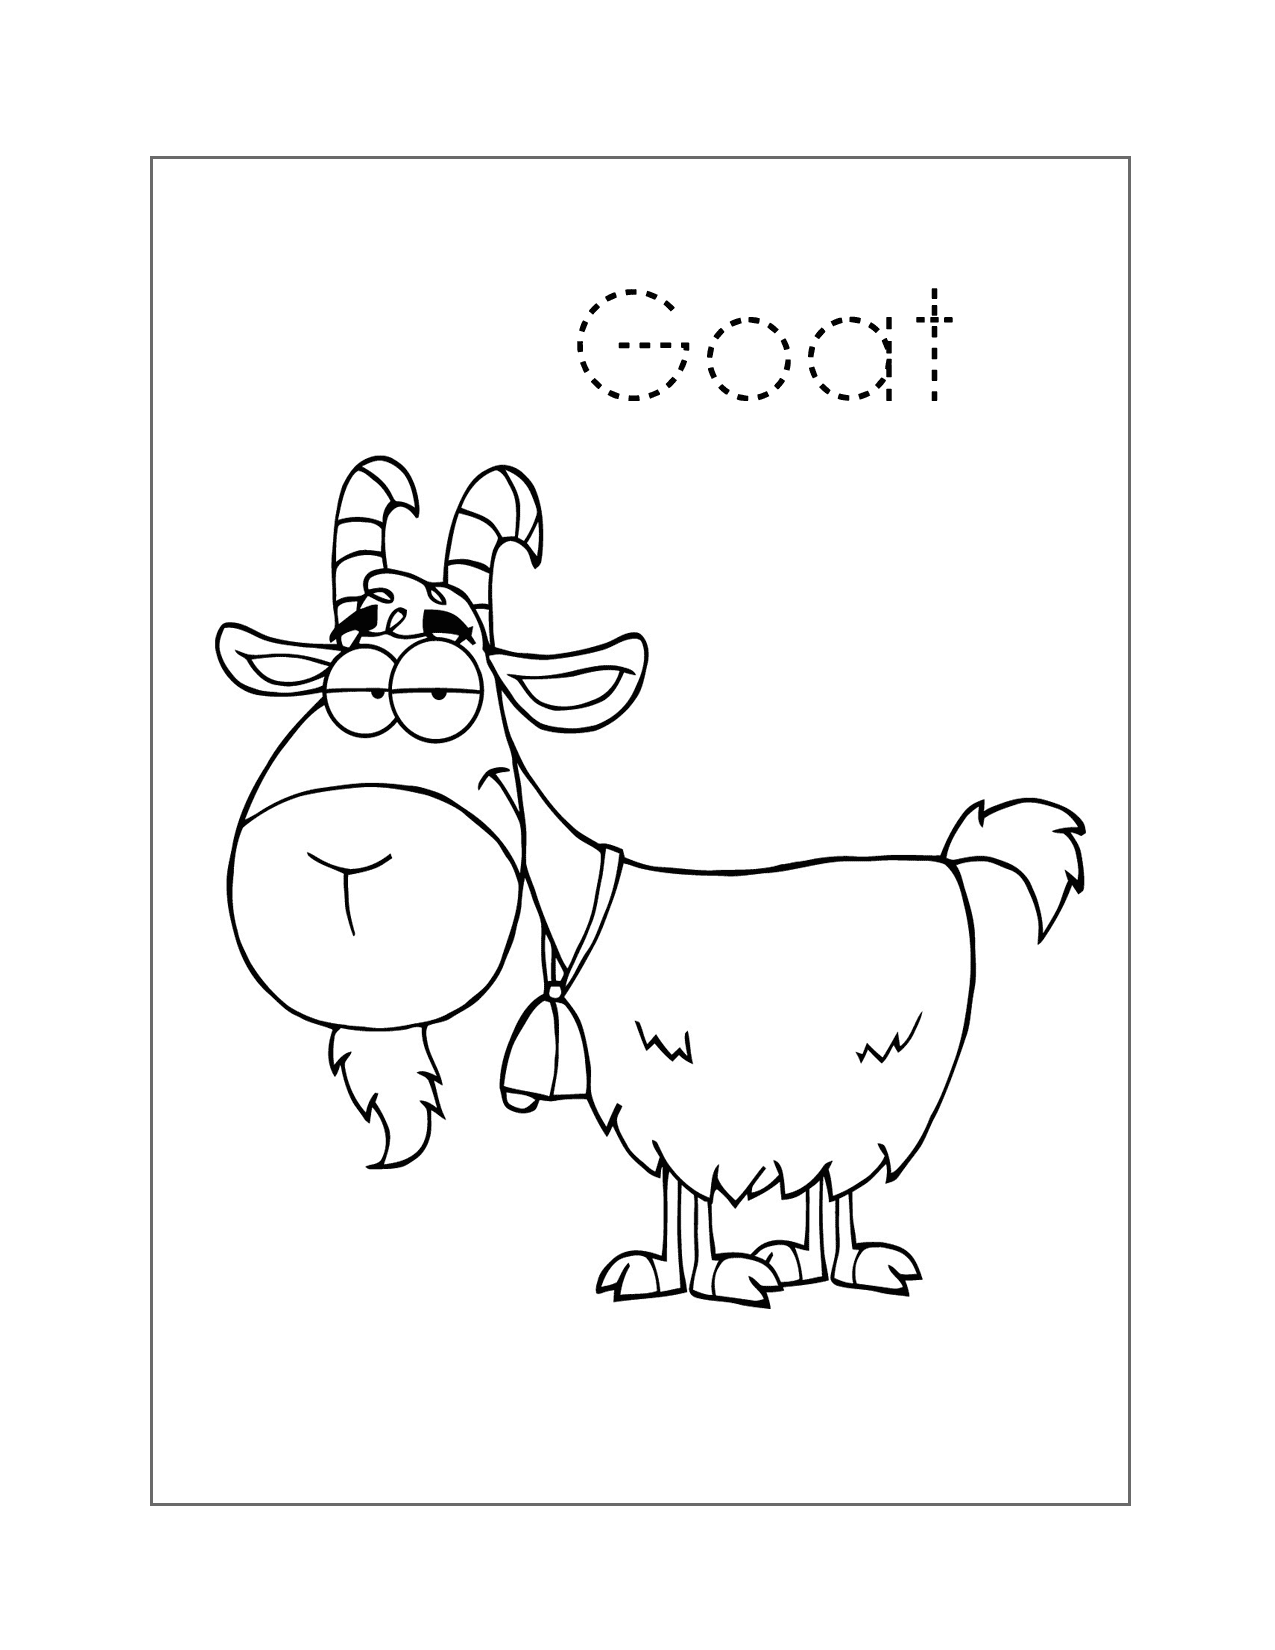 Goat Spelling And Coloring Page